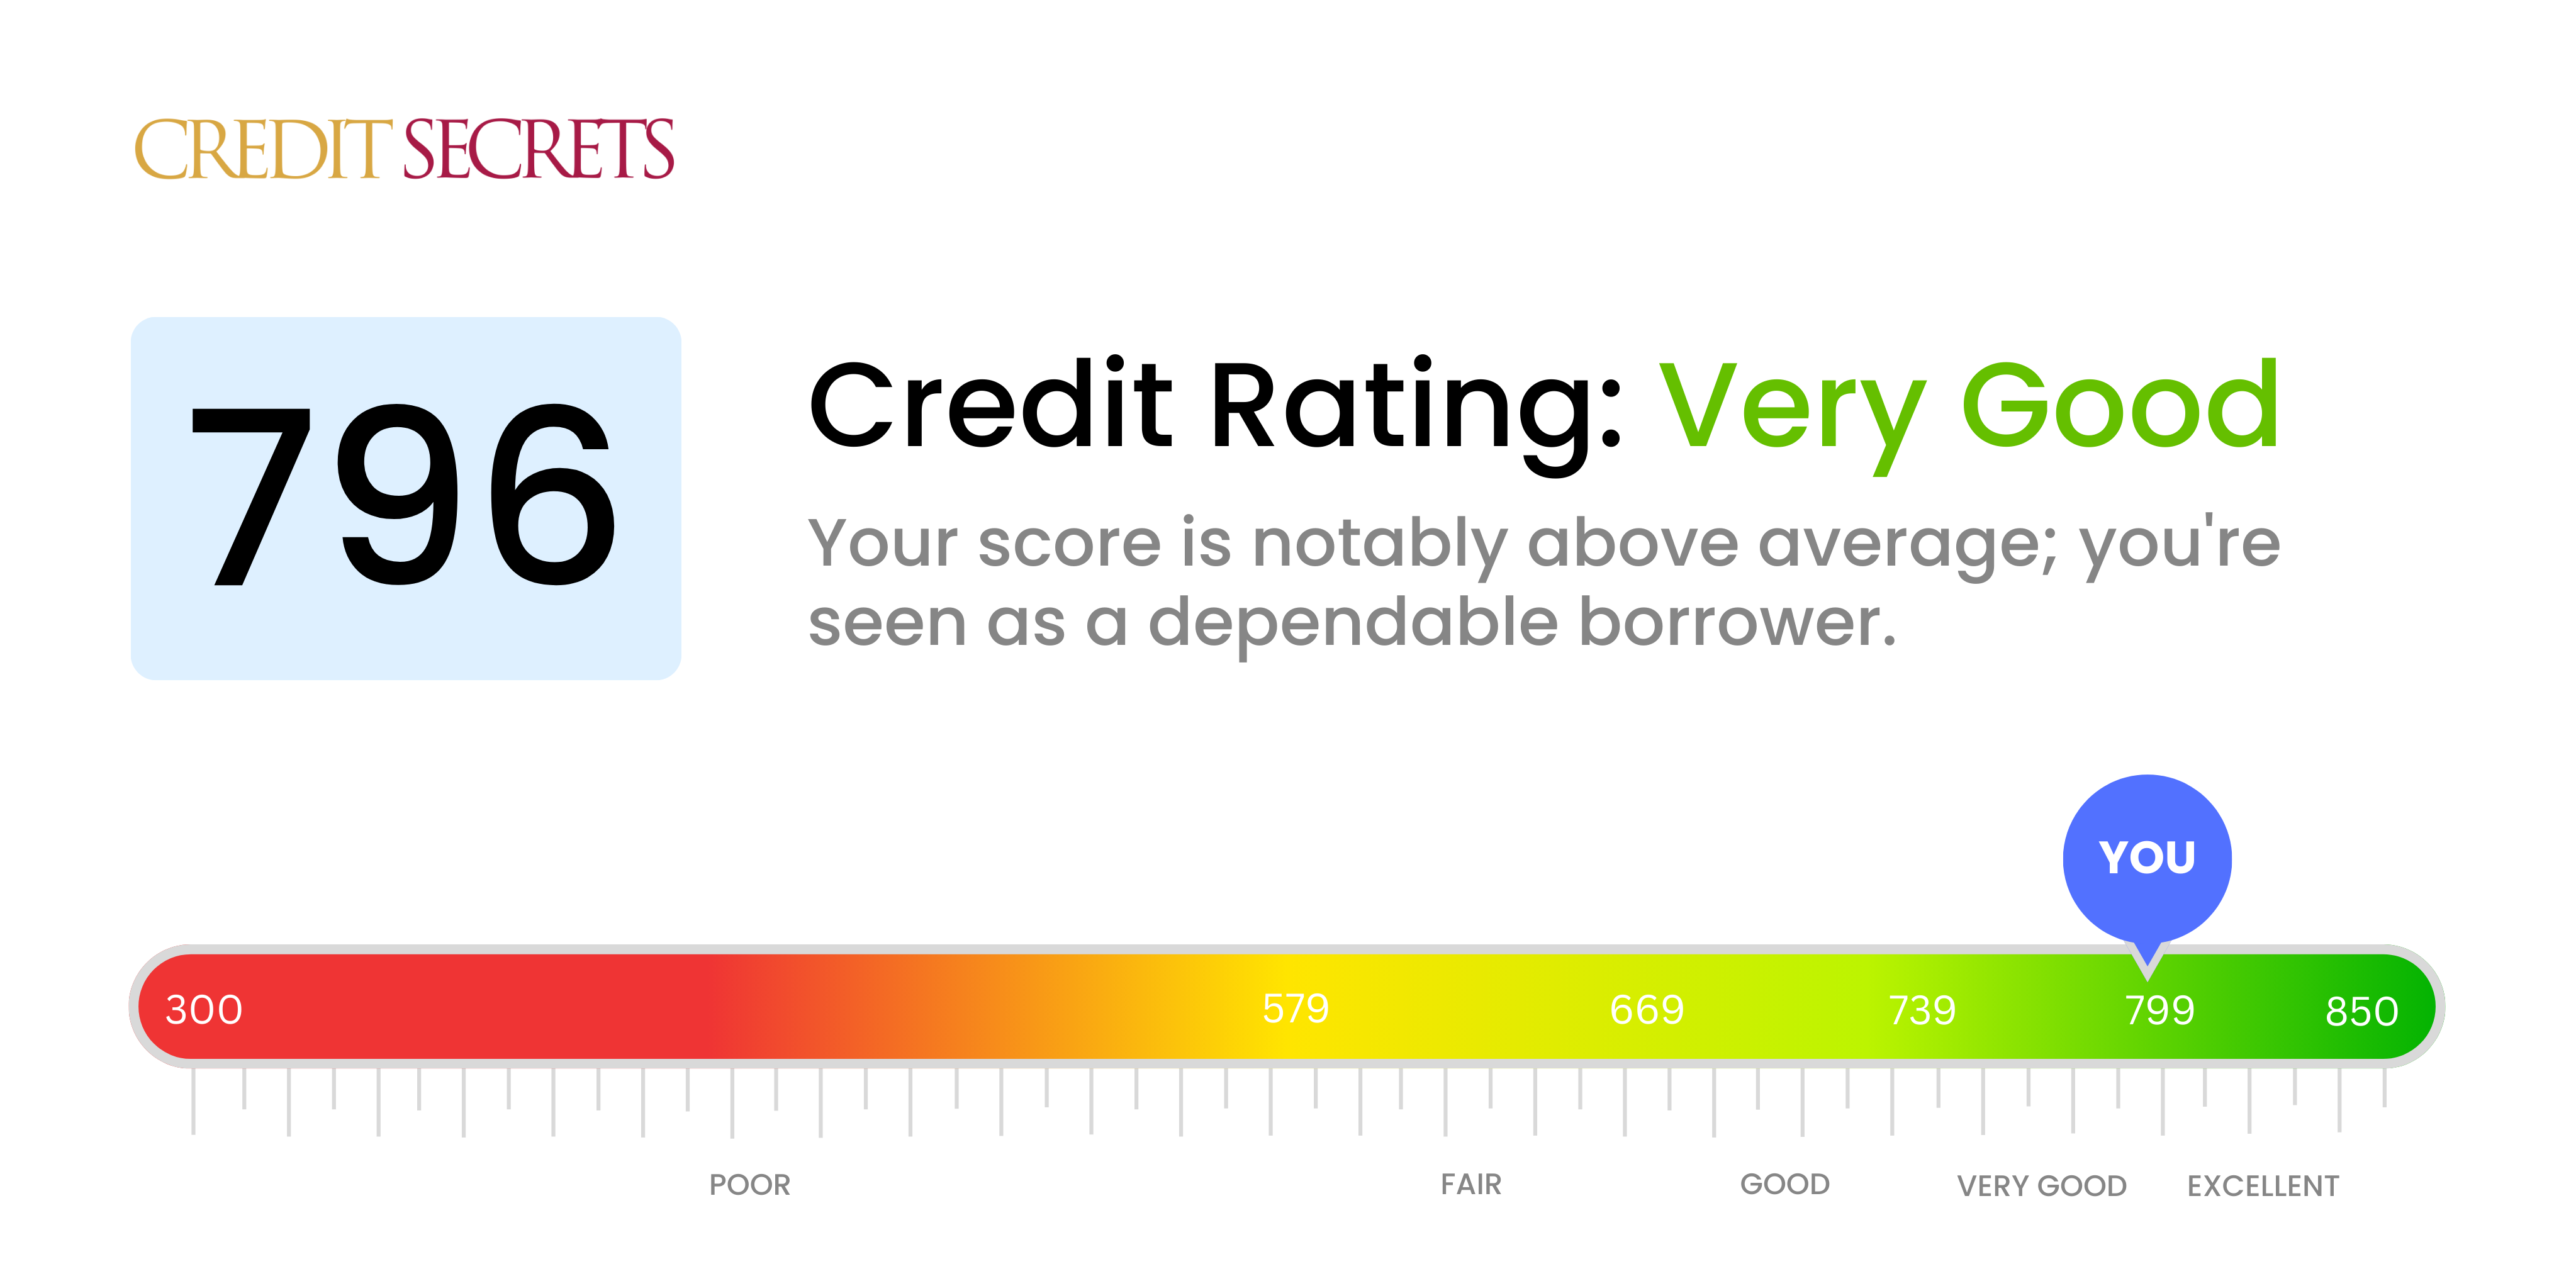 Is 796 a good credit score?